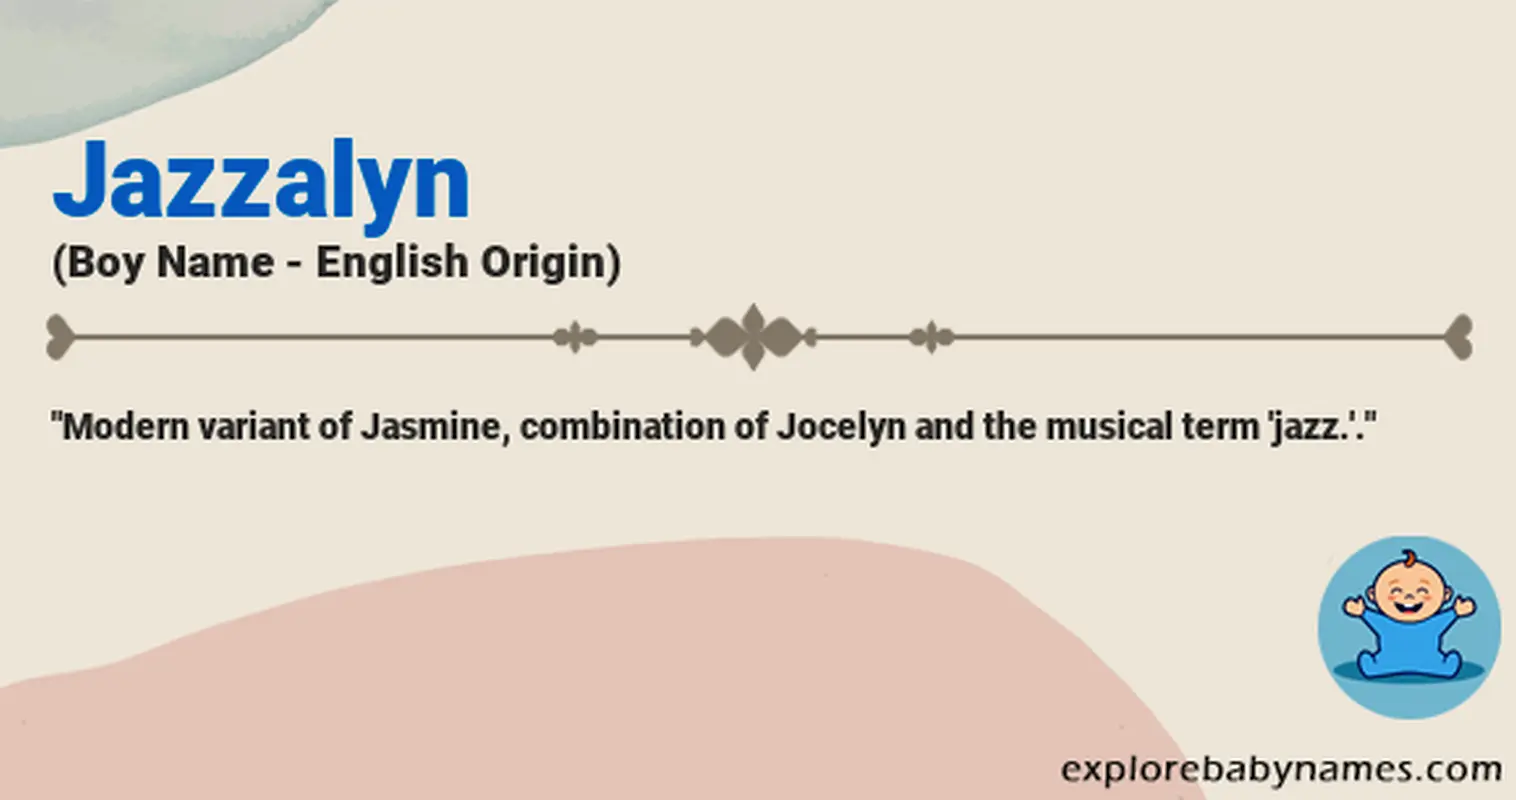 Meaning of Jazzalyn